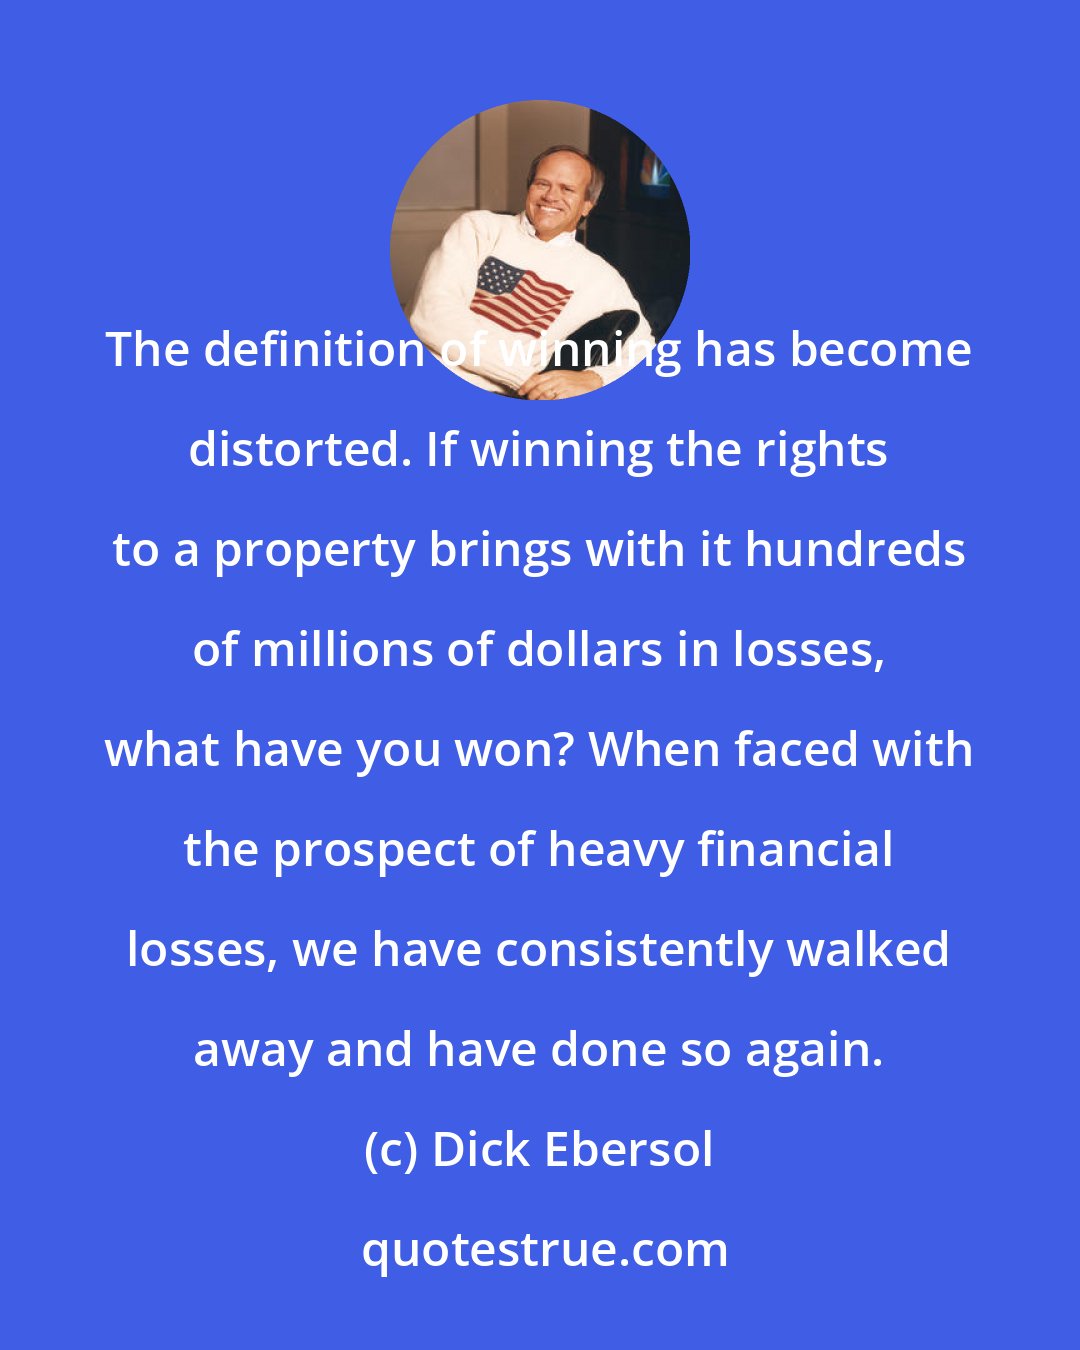 Dick Ebersol: The definition of winning has become distorted. If winning the rights to a property brings with it hundreds of millions of dollars in losses, what have you won? When faced with the prospect of heavy financial losses, we have consistently walked away and have done so again.